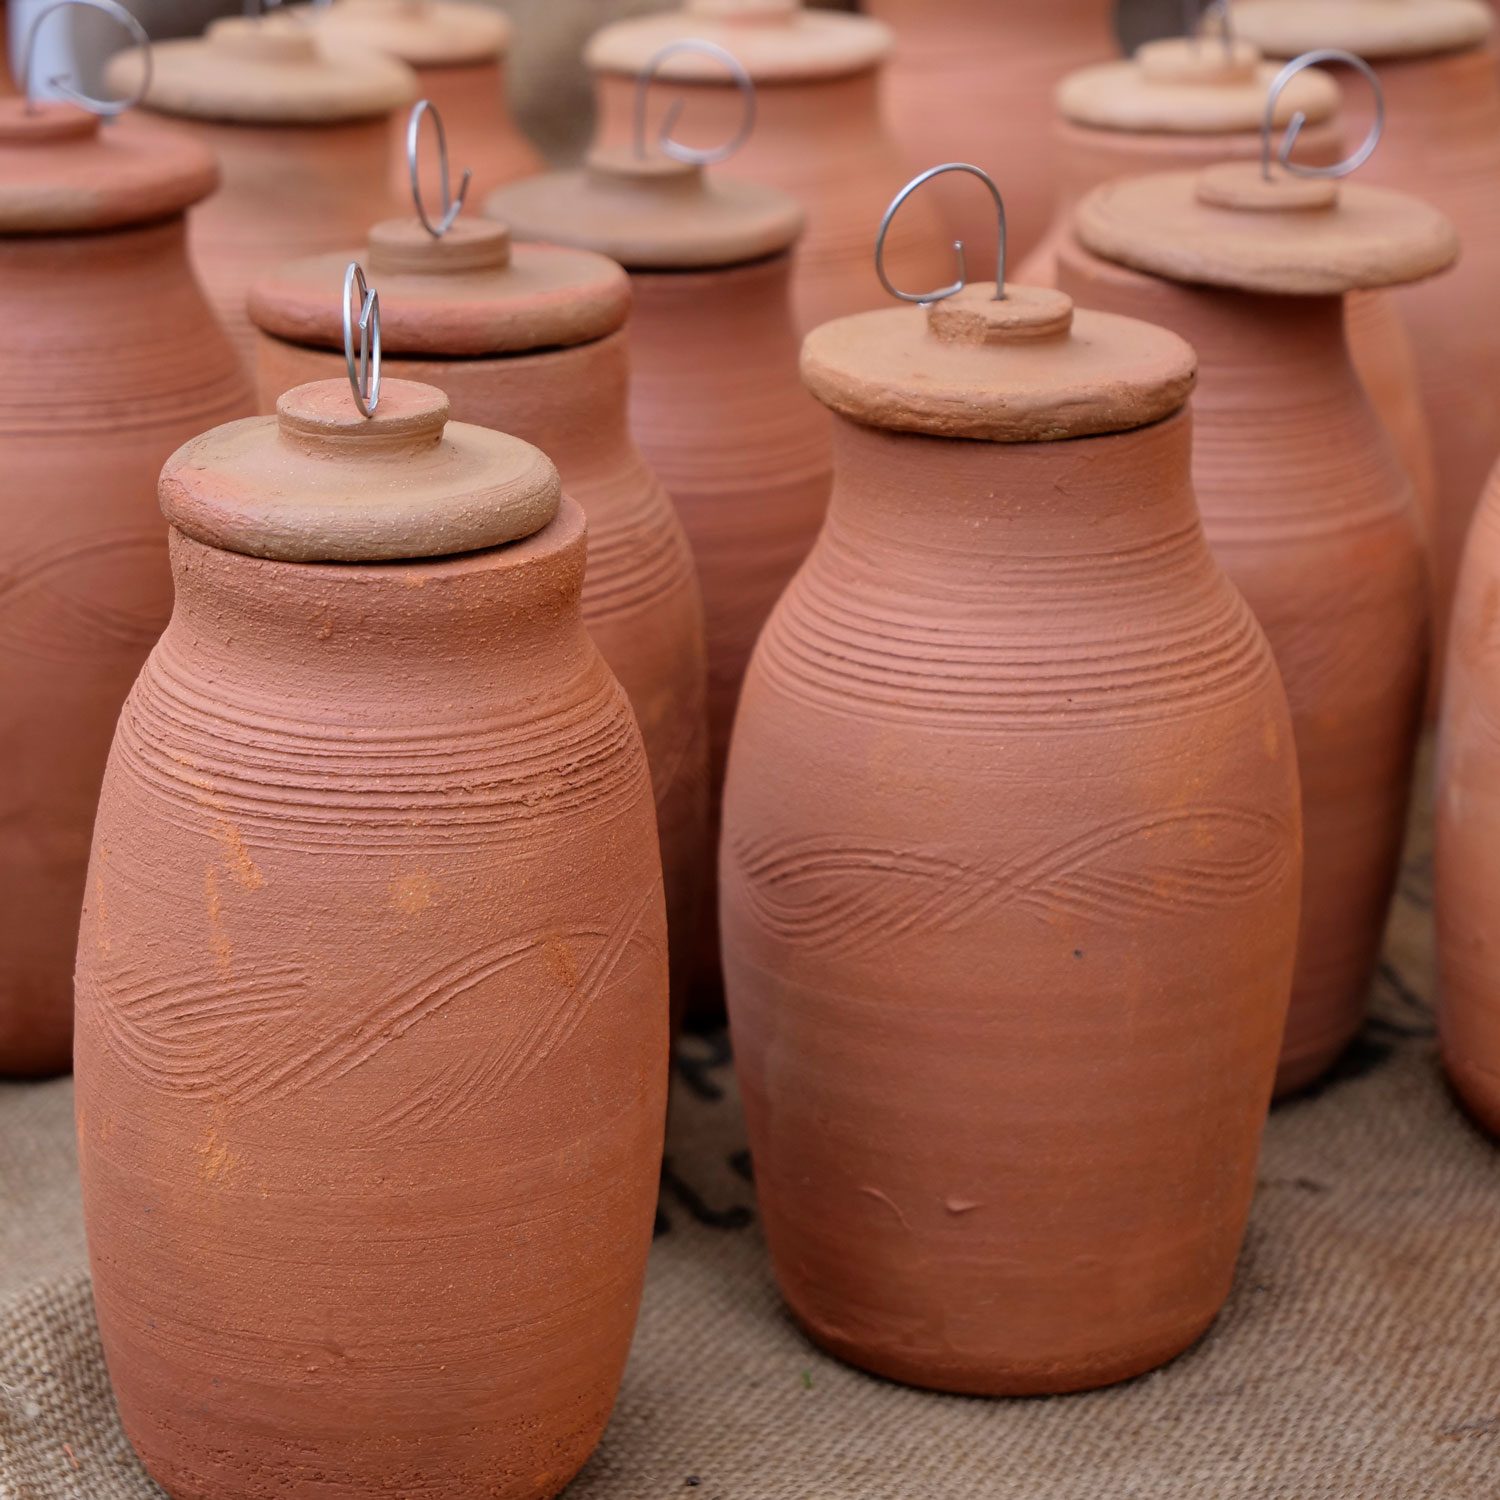 https://www.familyhandyman.com/wp-content/uploads/2023/10/Getty-1487947395-Resize-Crop-DH-FHM-Ancient-Terracotta-Olla-Pot-Watering-System.jpg?fit=700%2C1024